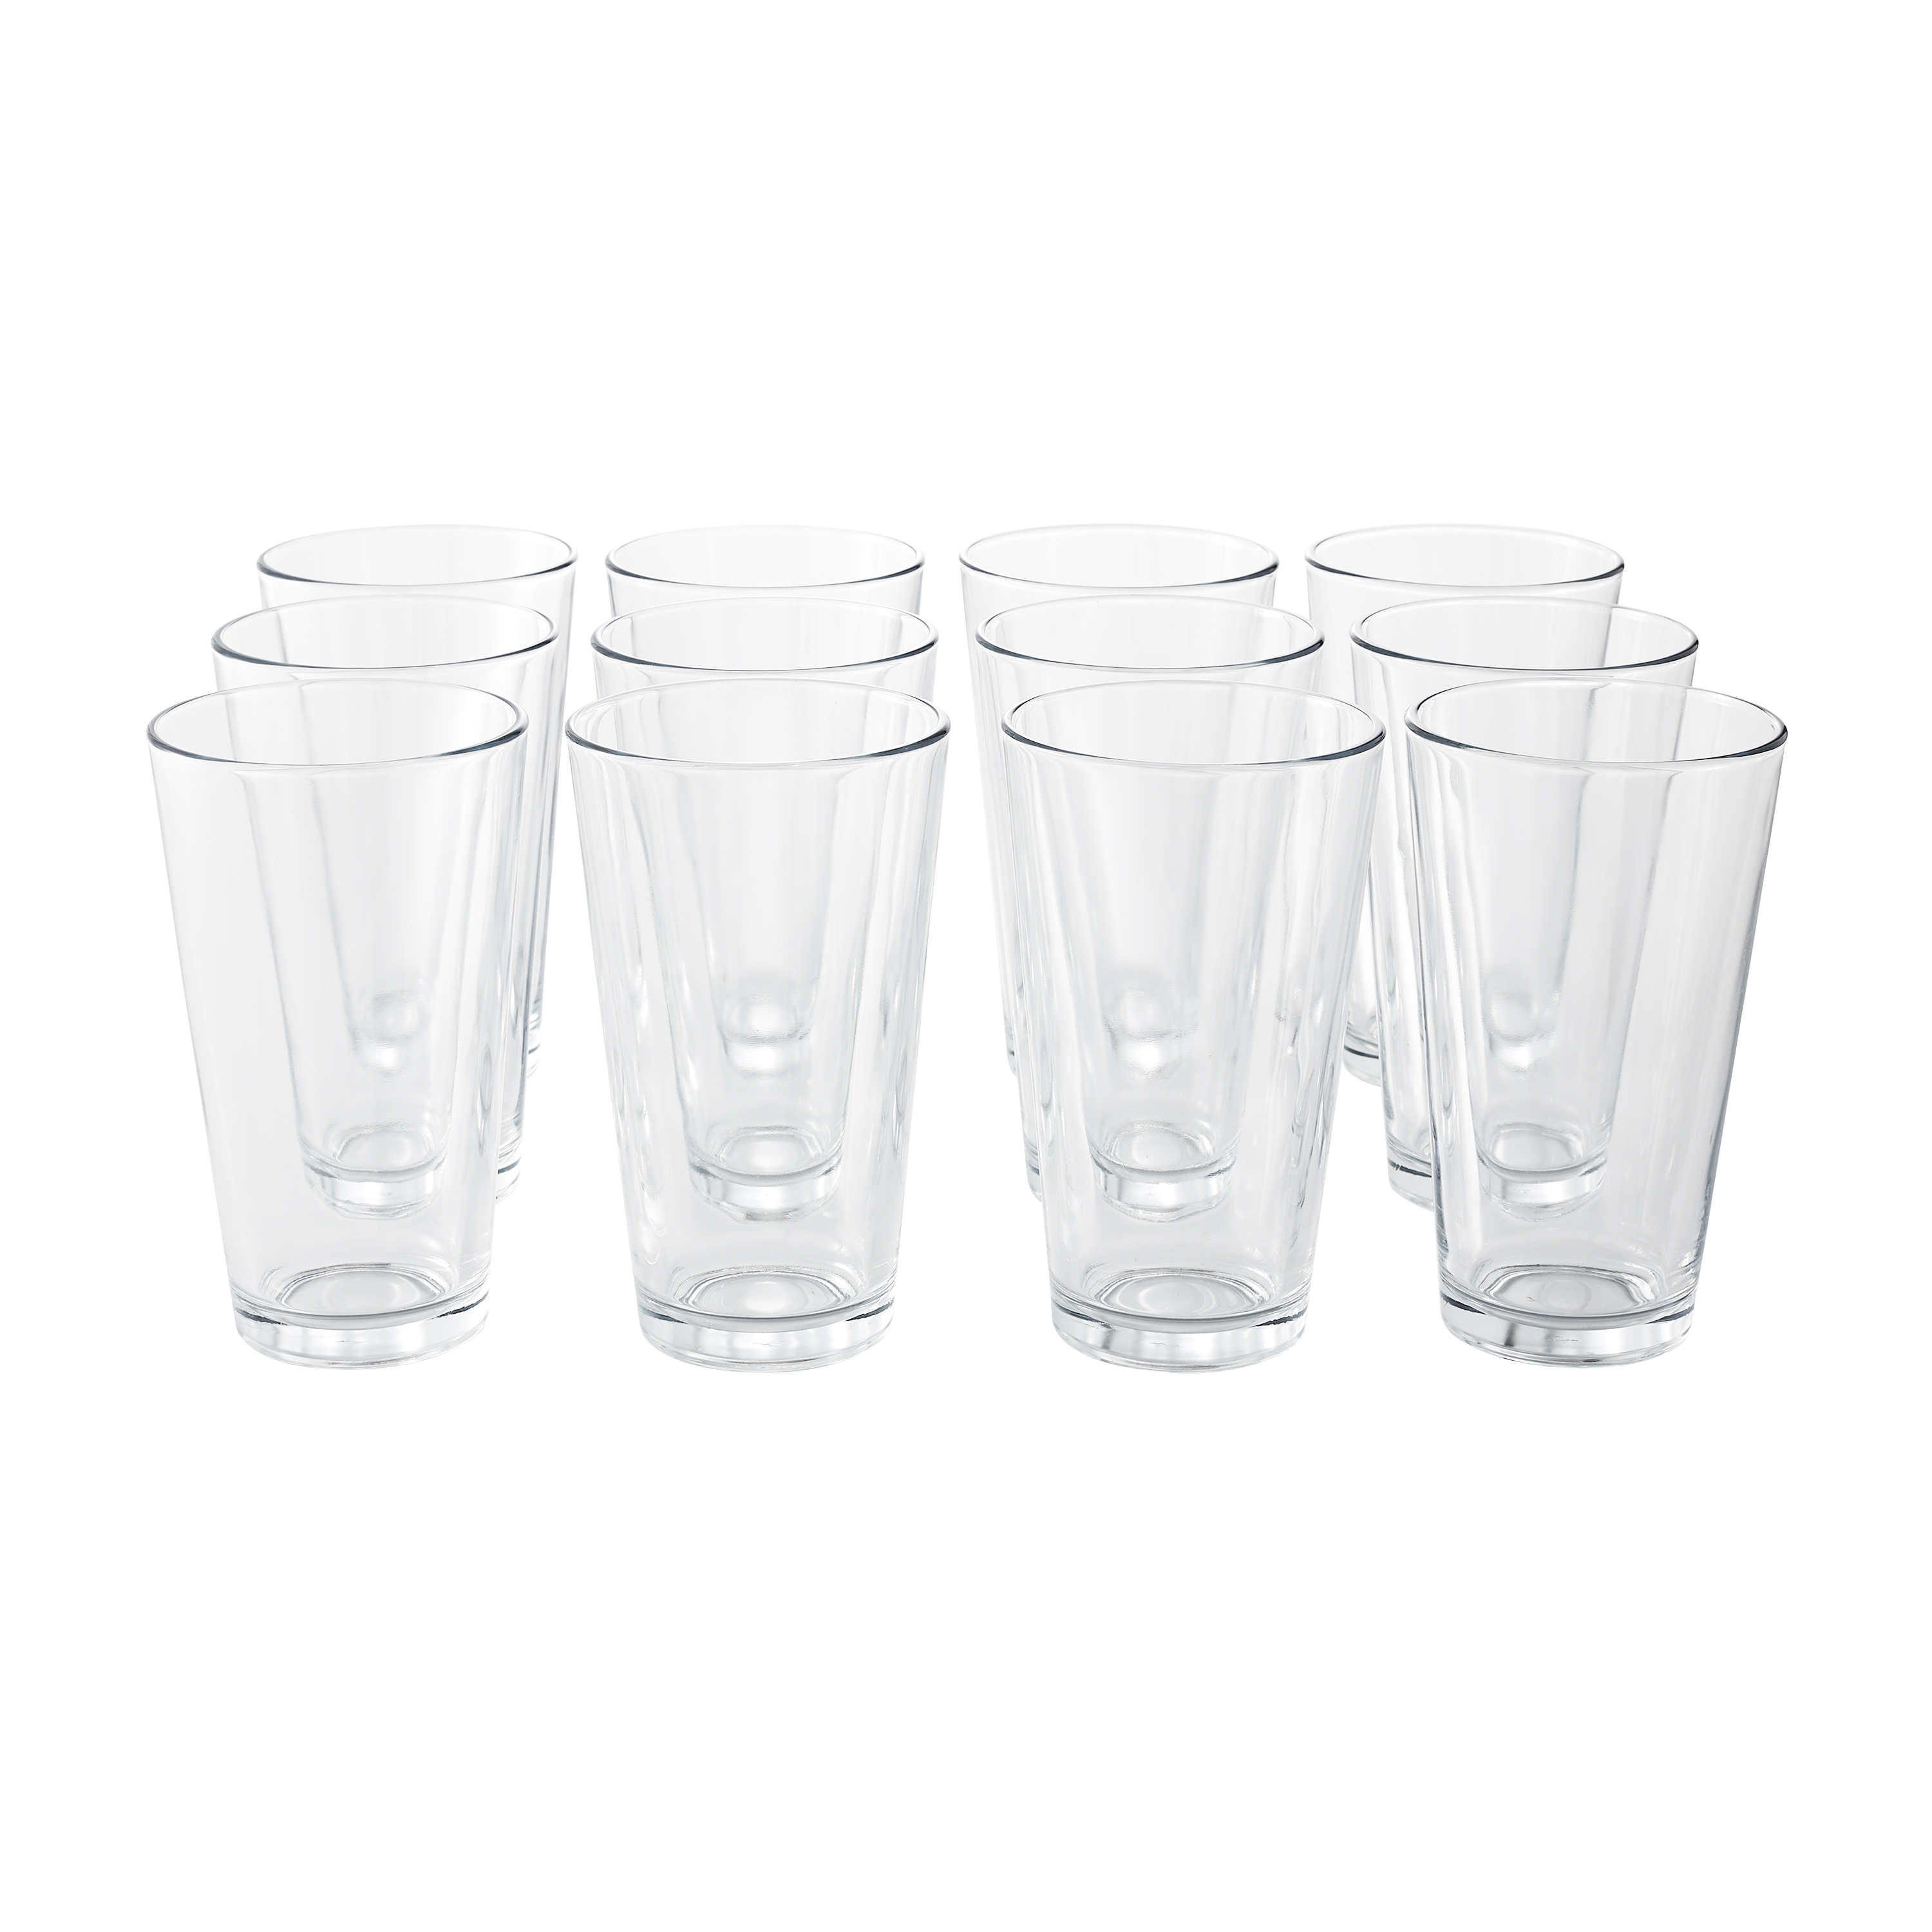 Mainstays 16-Ounce All-Purpose Cooler Glasses, Set of 12 - image 3 of 4